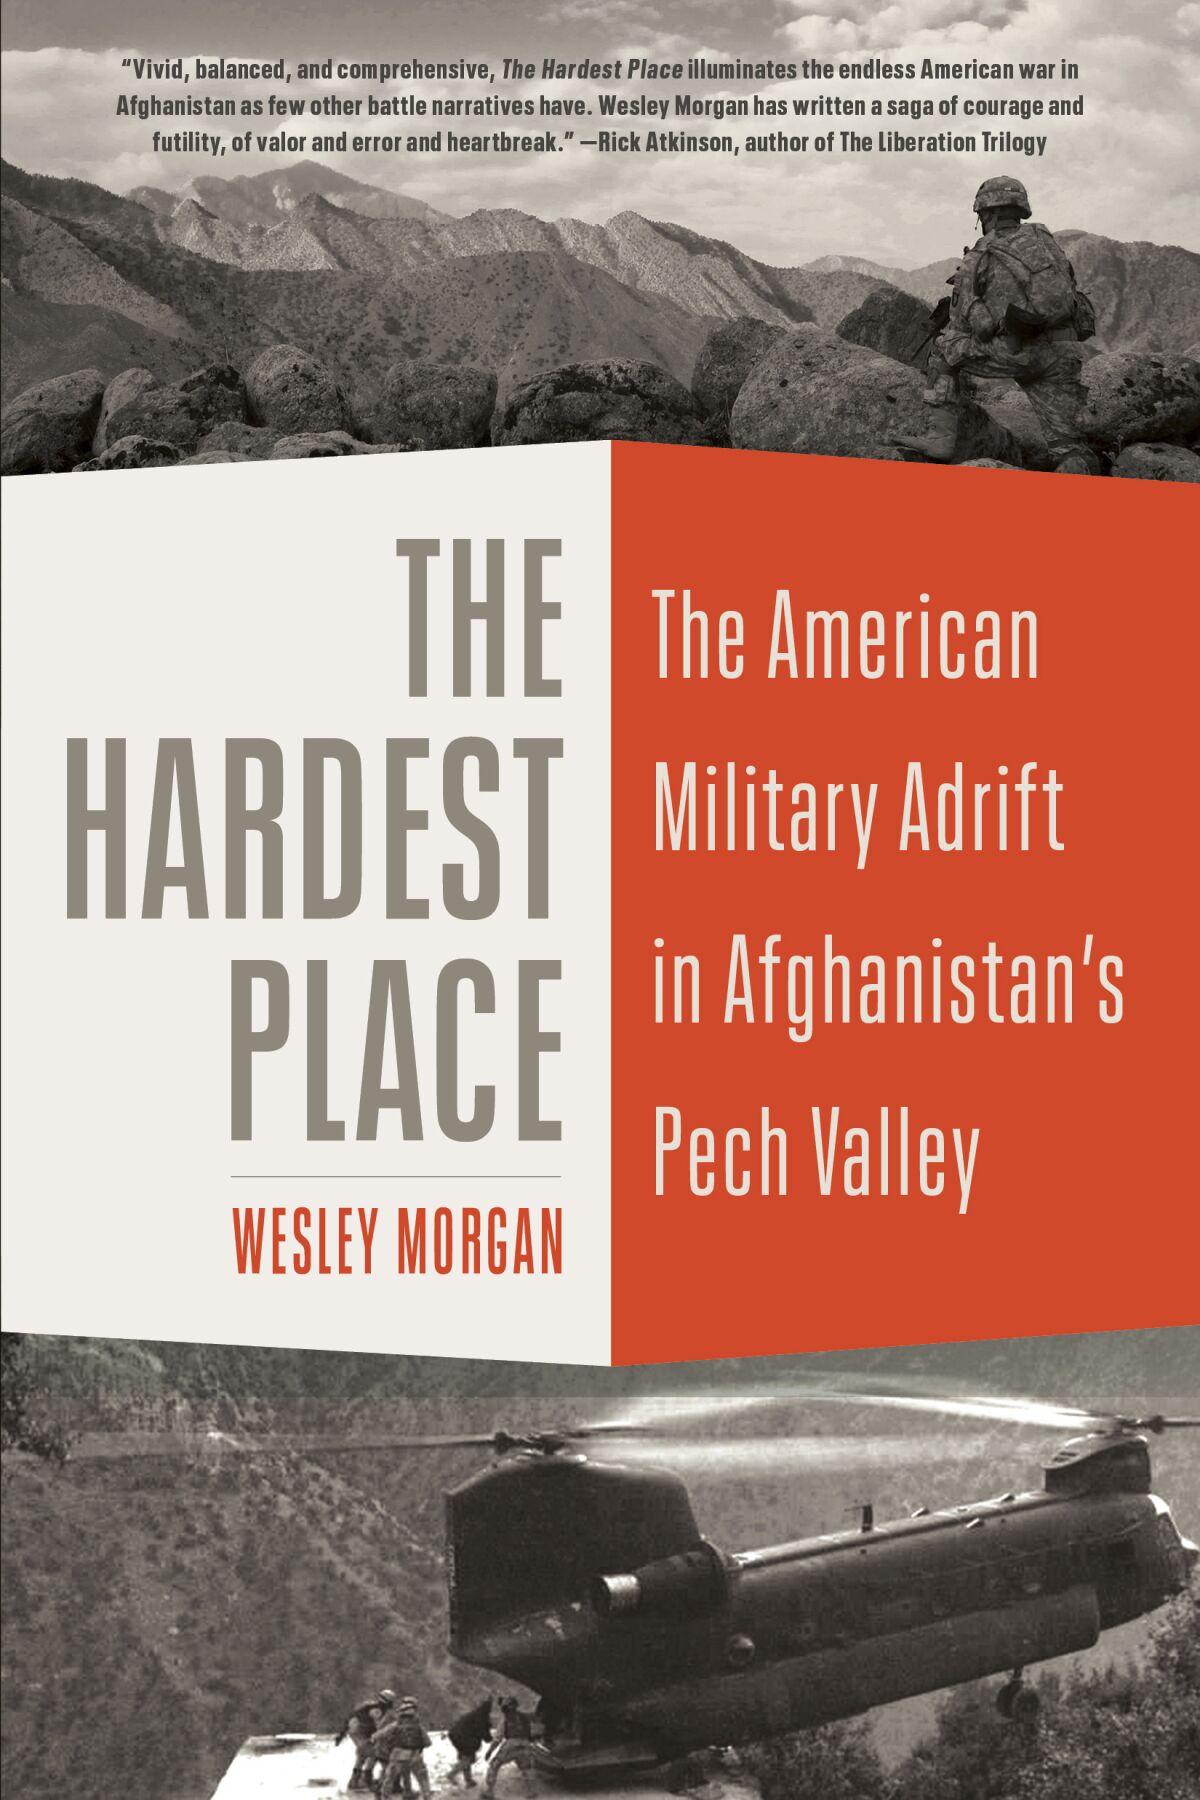 This cover image released by Random House shows "The Hardest Place: The American Military Adrift in Afghanistan's Pech Valley" by Wesley Morgan, winner of this year’s winner of the William E. Colby Award for military and intelligence writing. (Random House via AP)